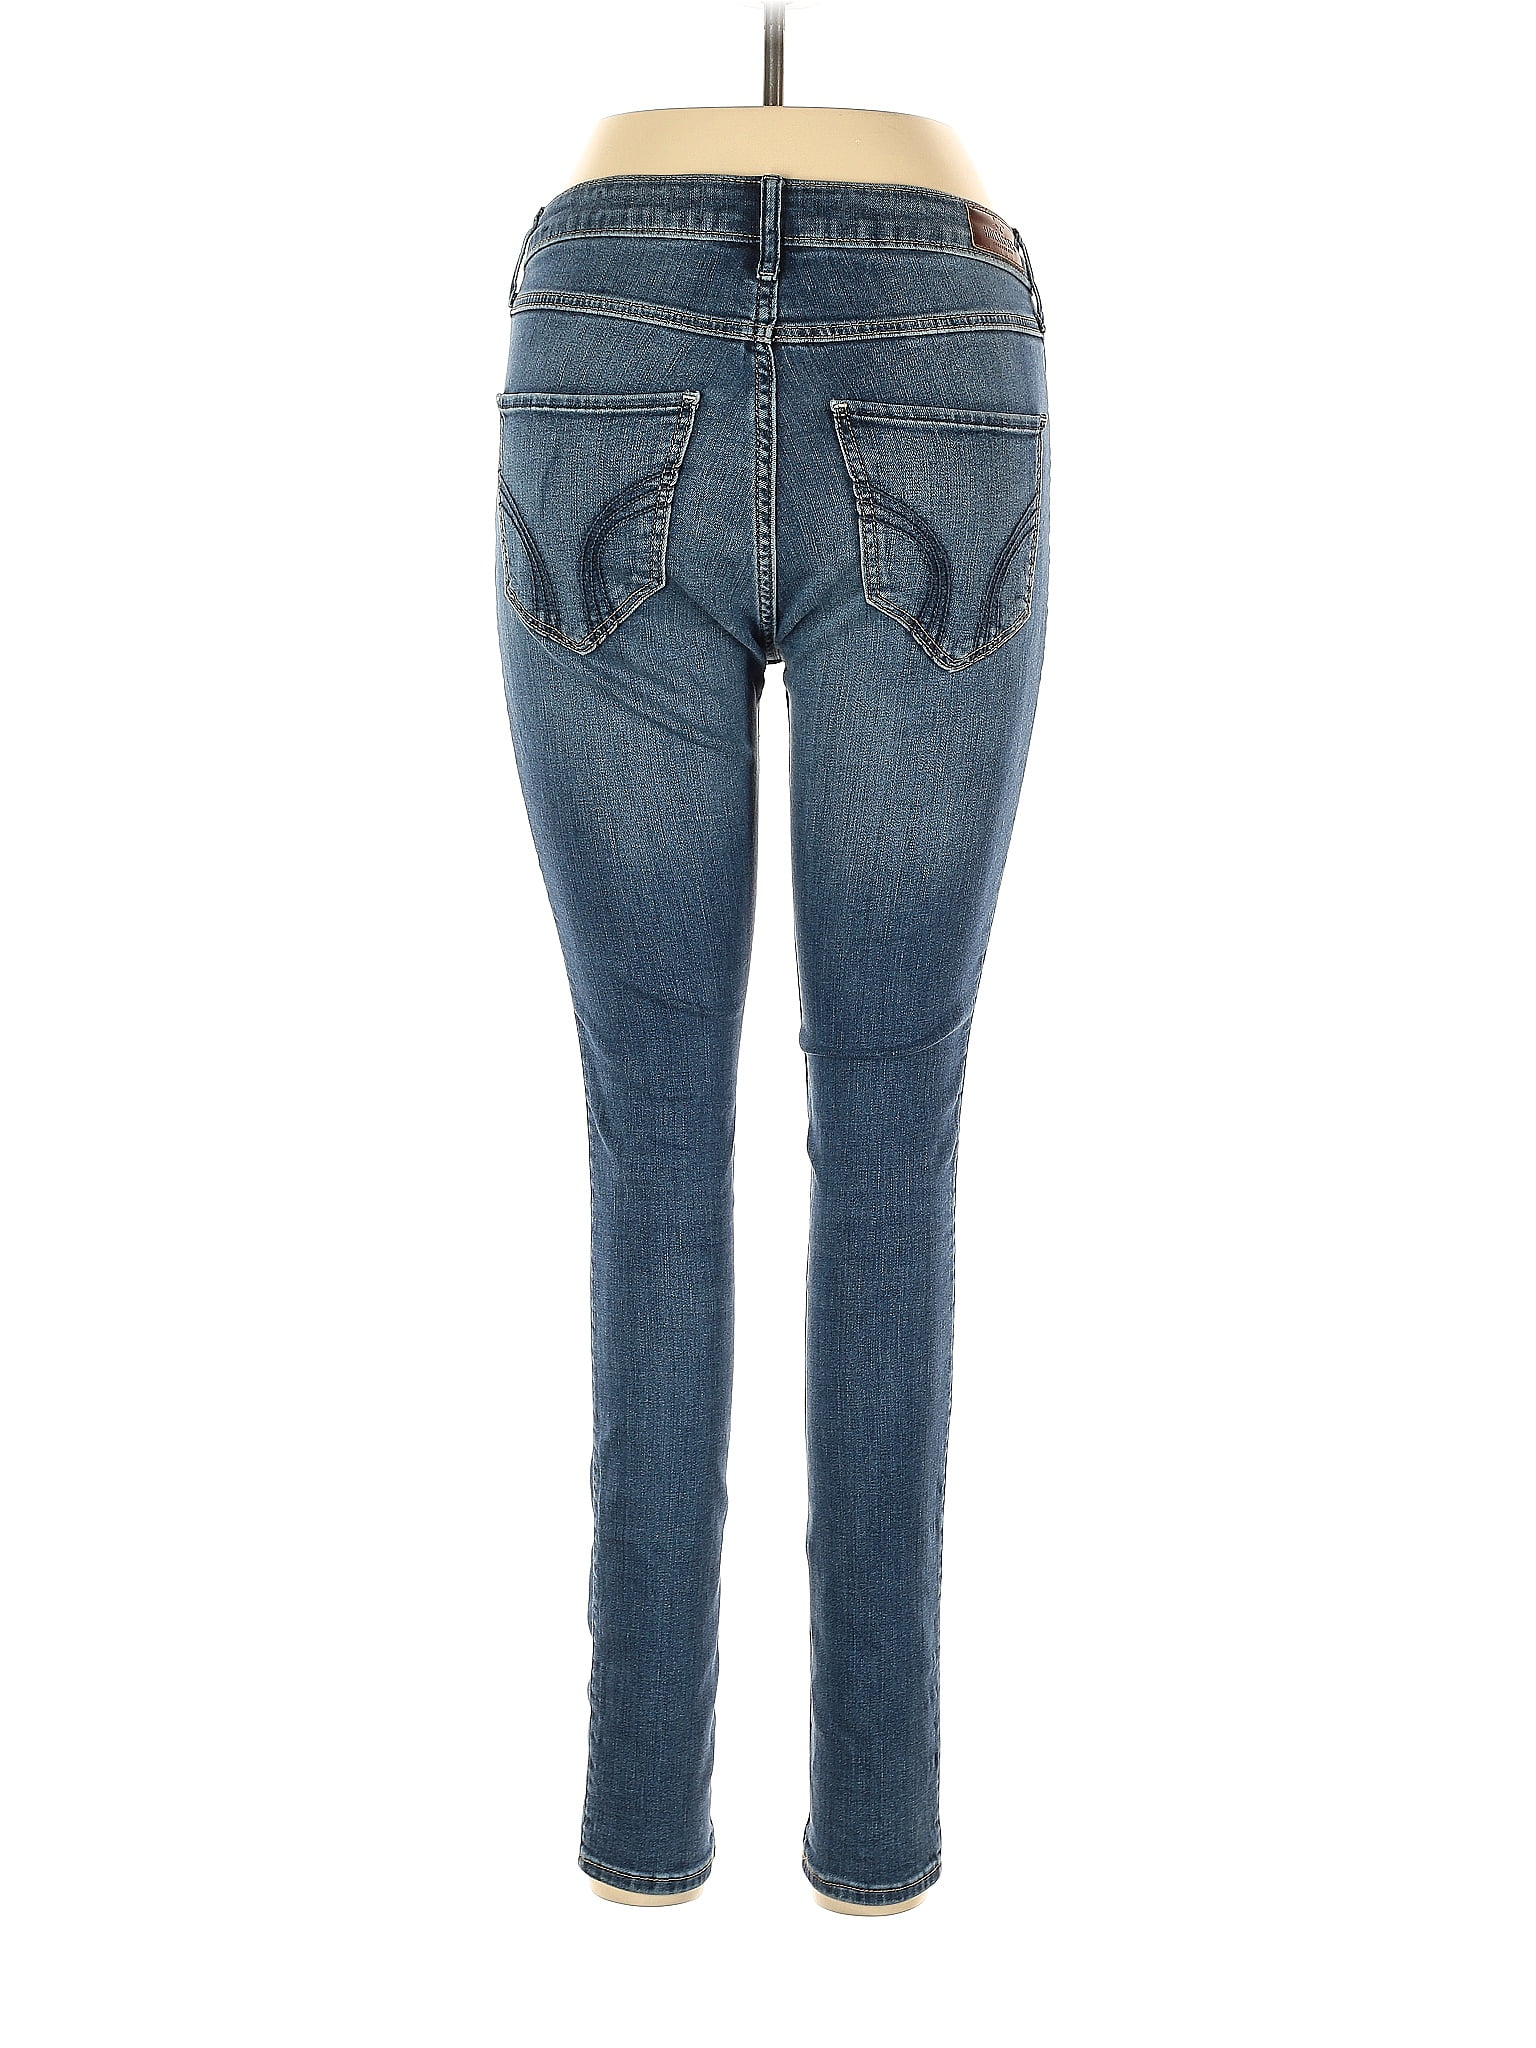 Hollister Juniors Jeans On Sale Up To 90% Off Retail